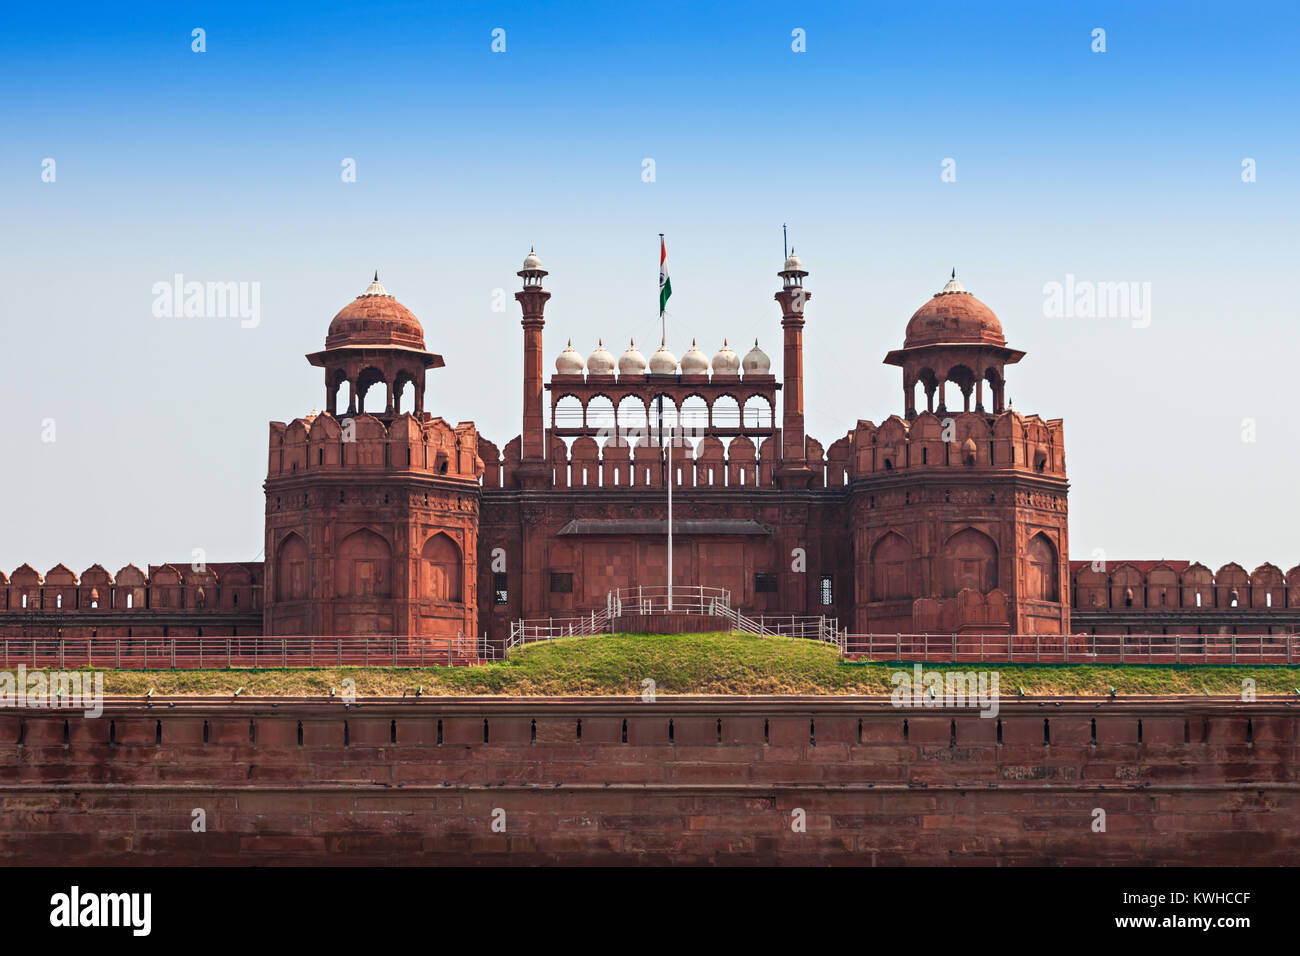 The Red Fort is a large fort complex located in Delhi Stock Photo